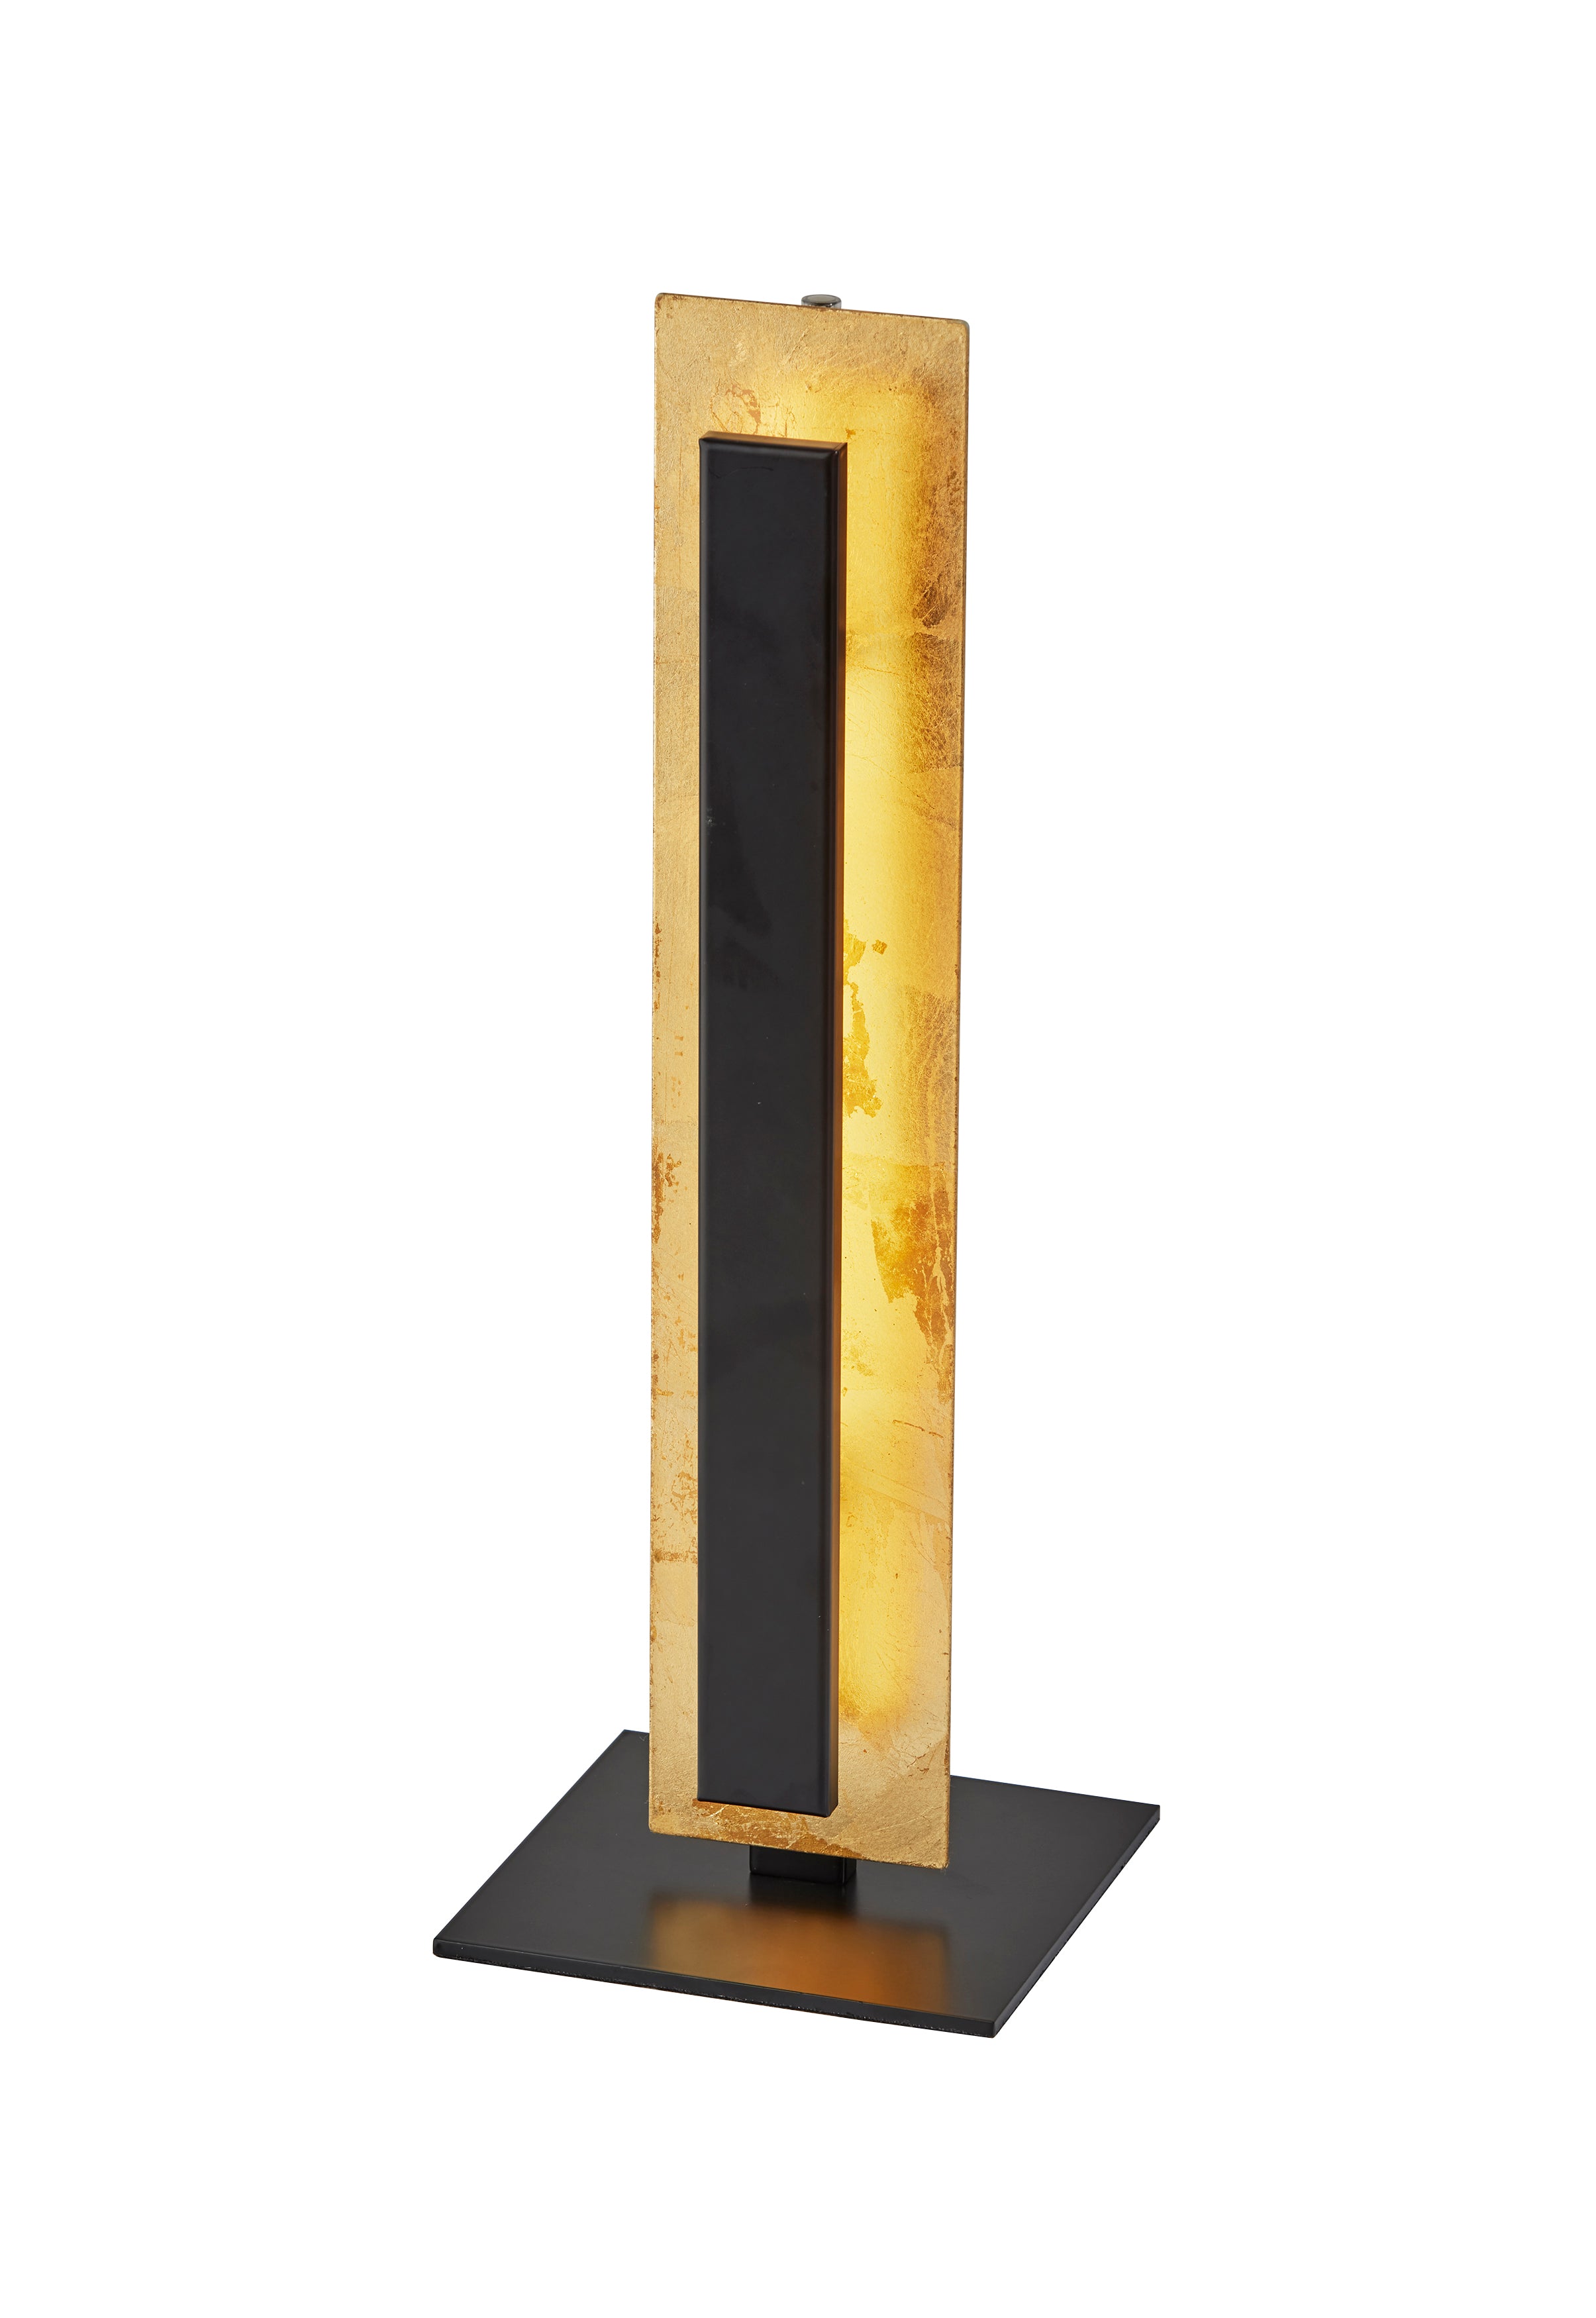 HAYDEN Table lamp Black, Gold INTEGRATED LED - 2107-04 | ADESSO